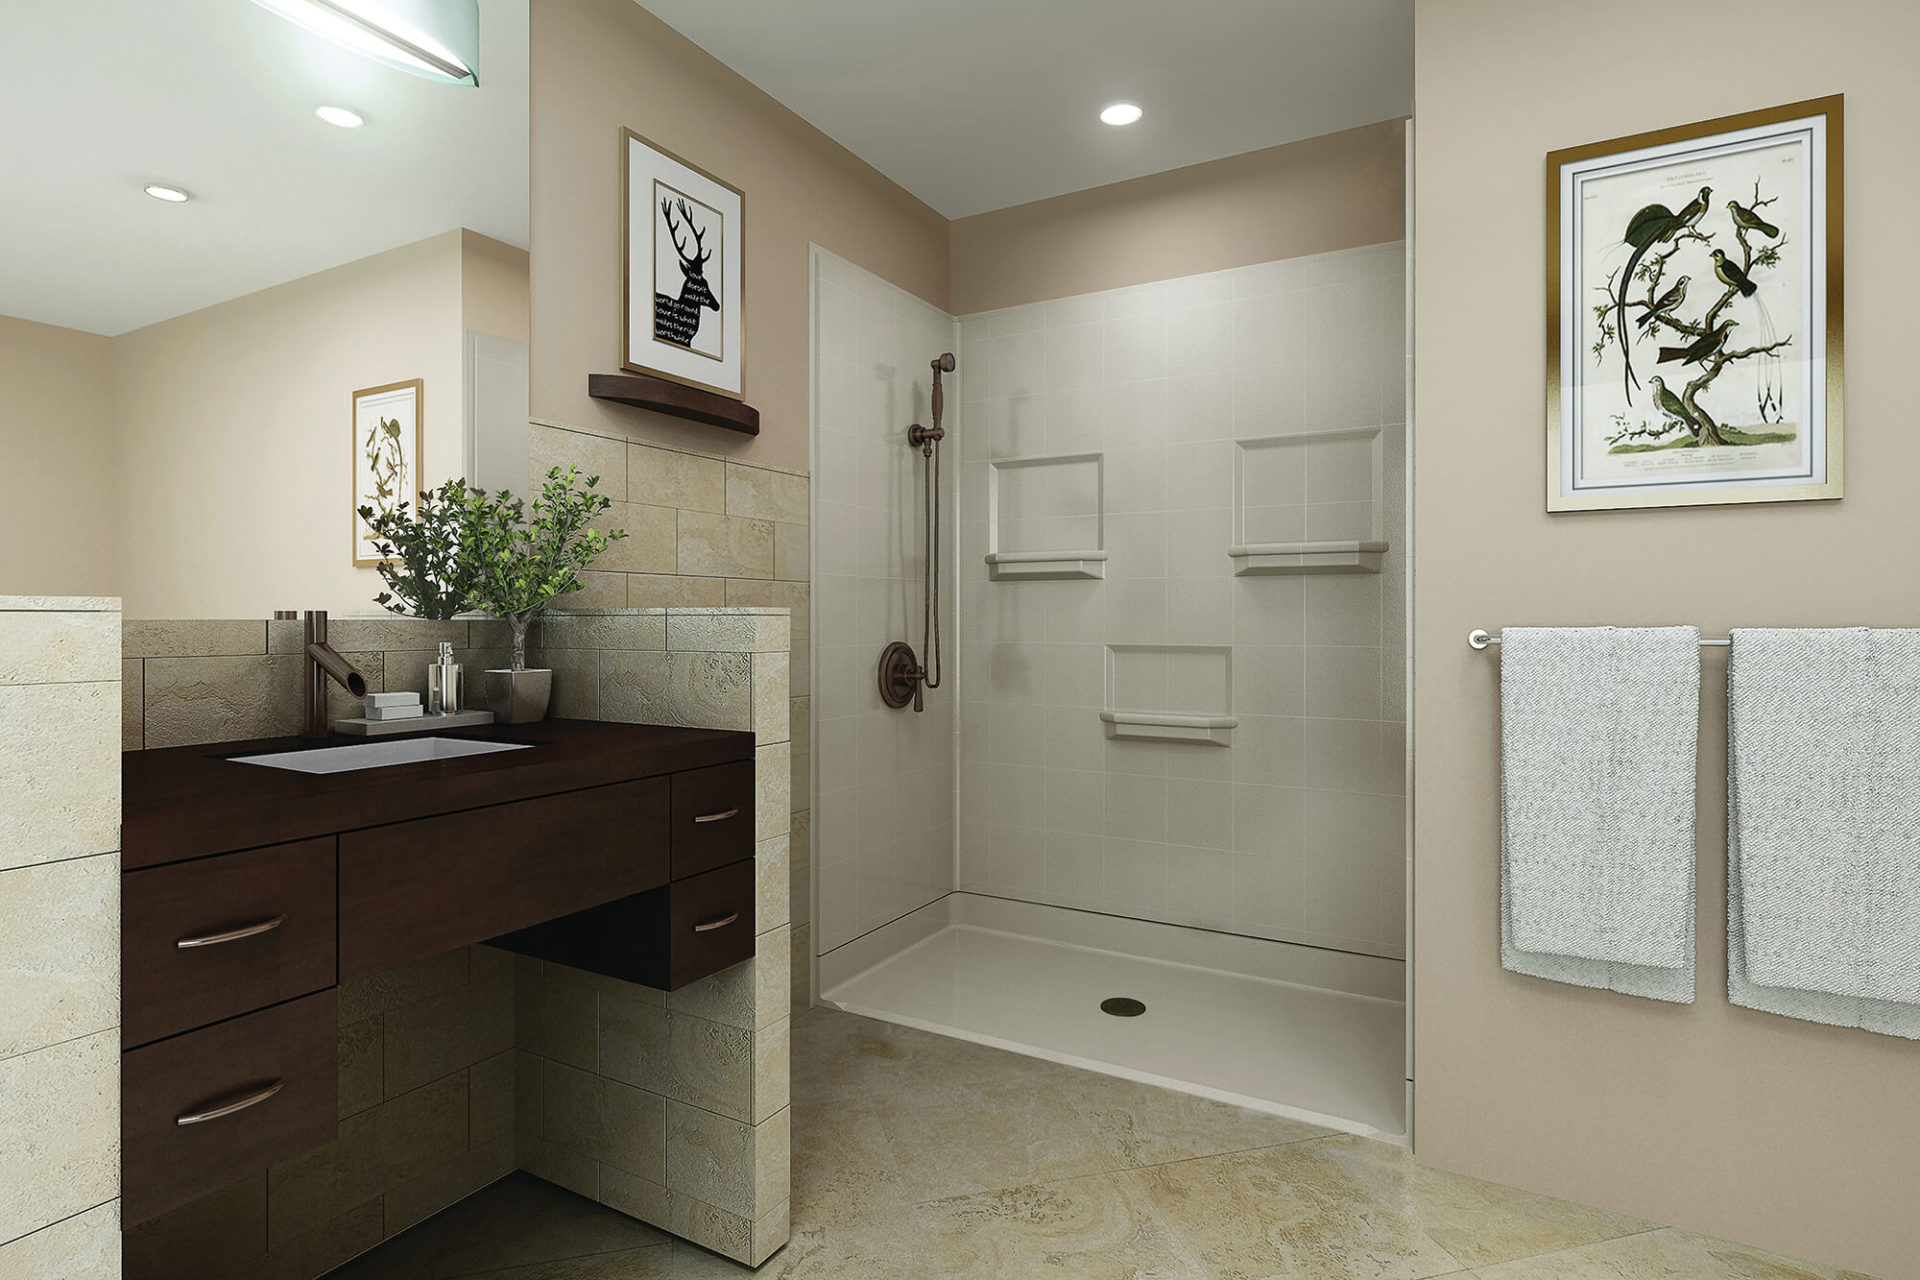 Accessible Universal Design and Aging in Place Bathrooms